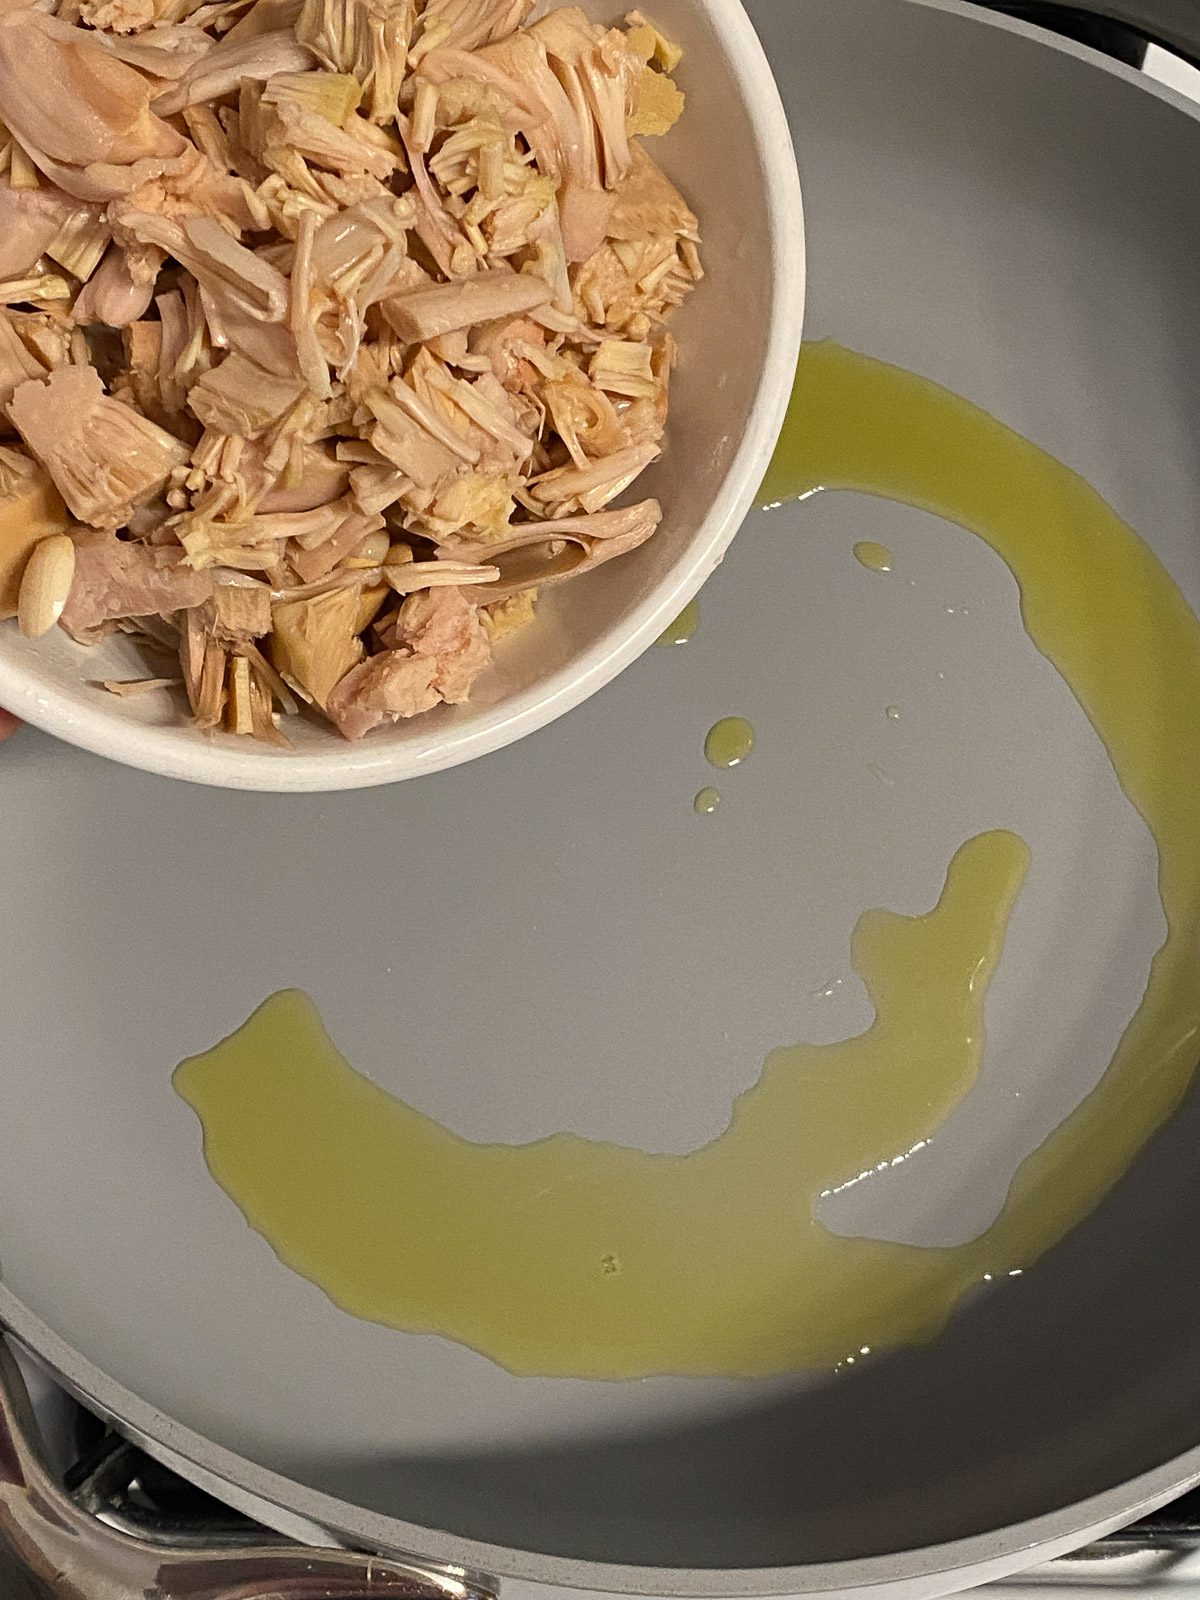 process shot showing jackfruit being added to pan of oil